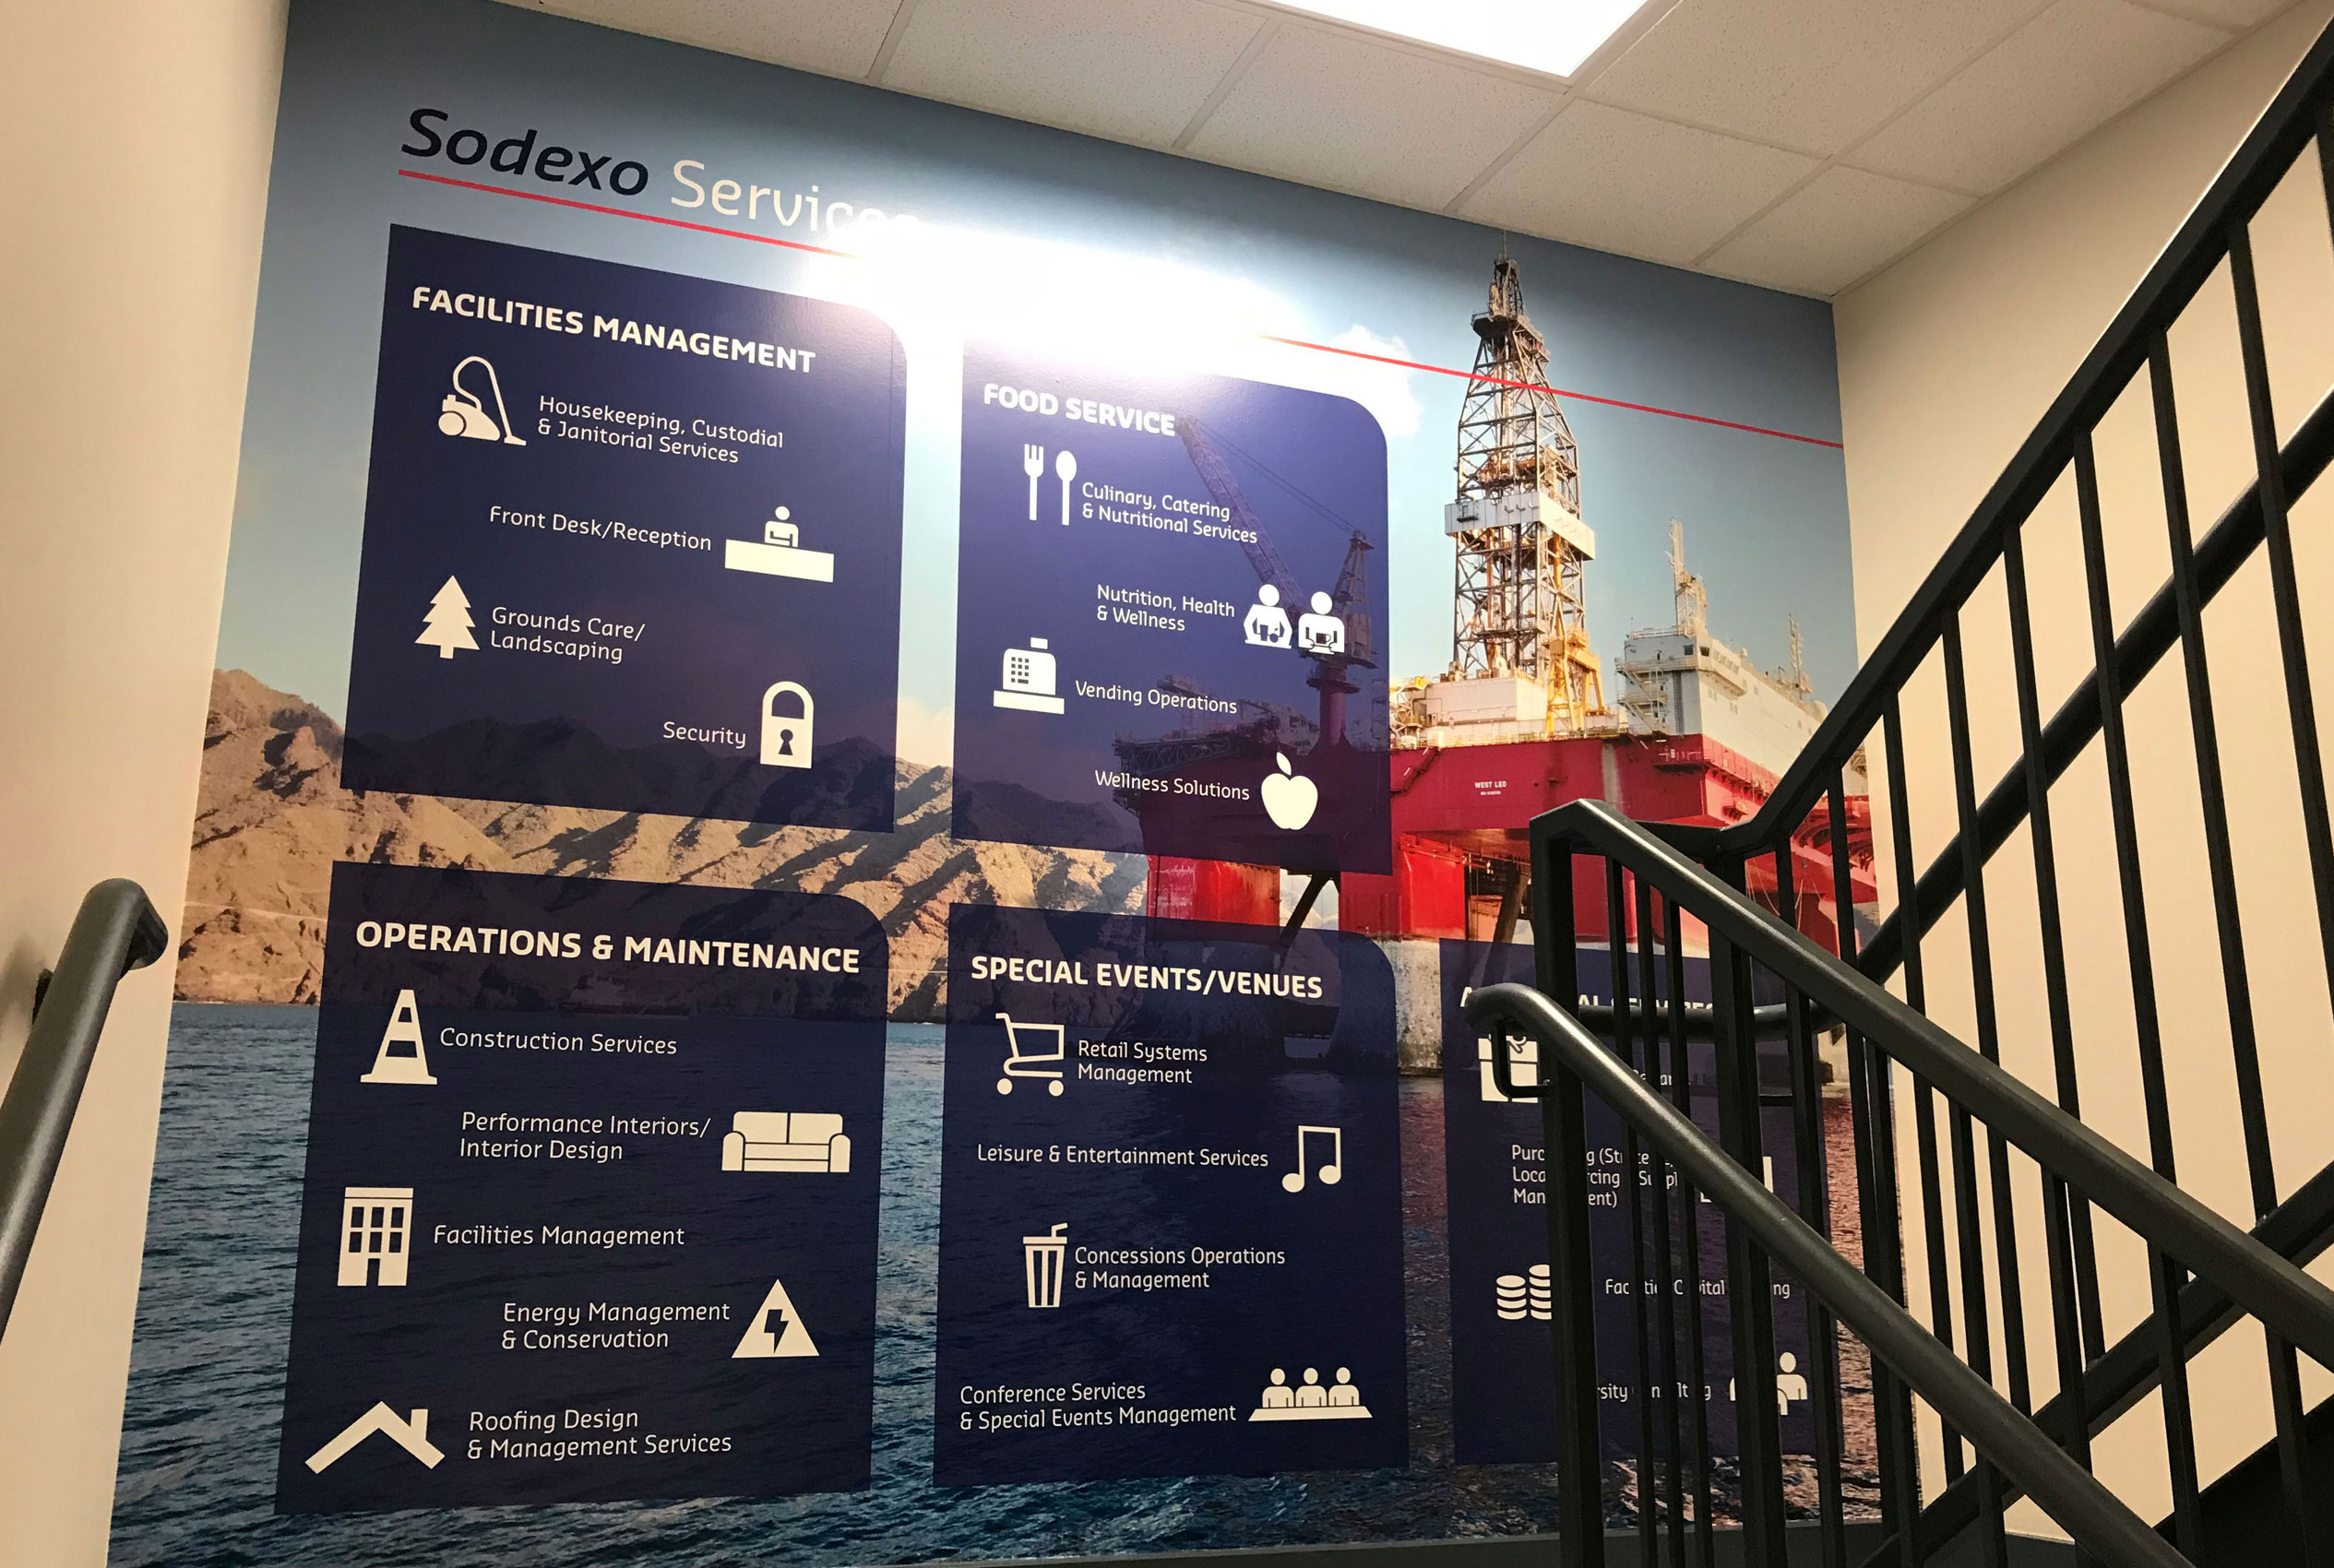 Wall sized photo in stairwell of Sodexo services and oil derrick